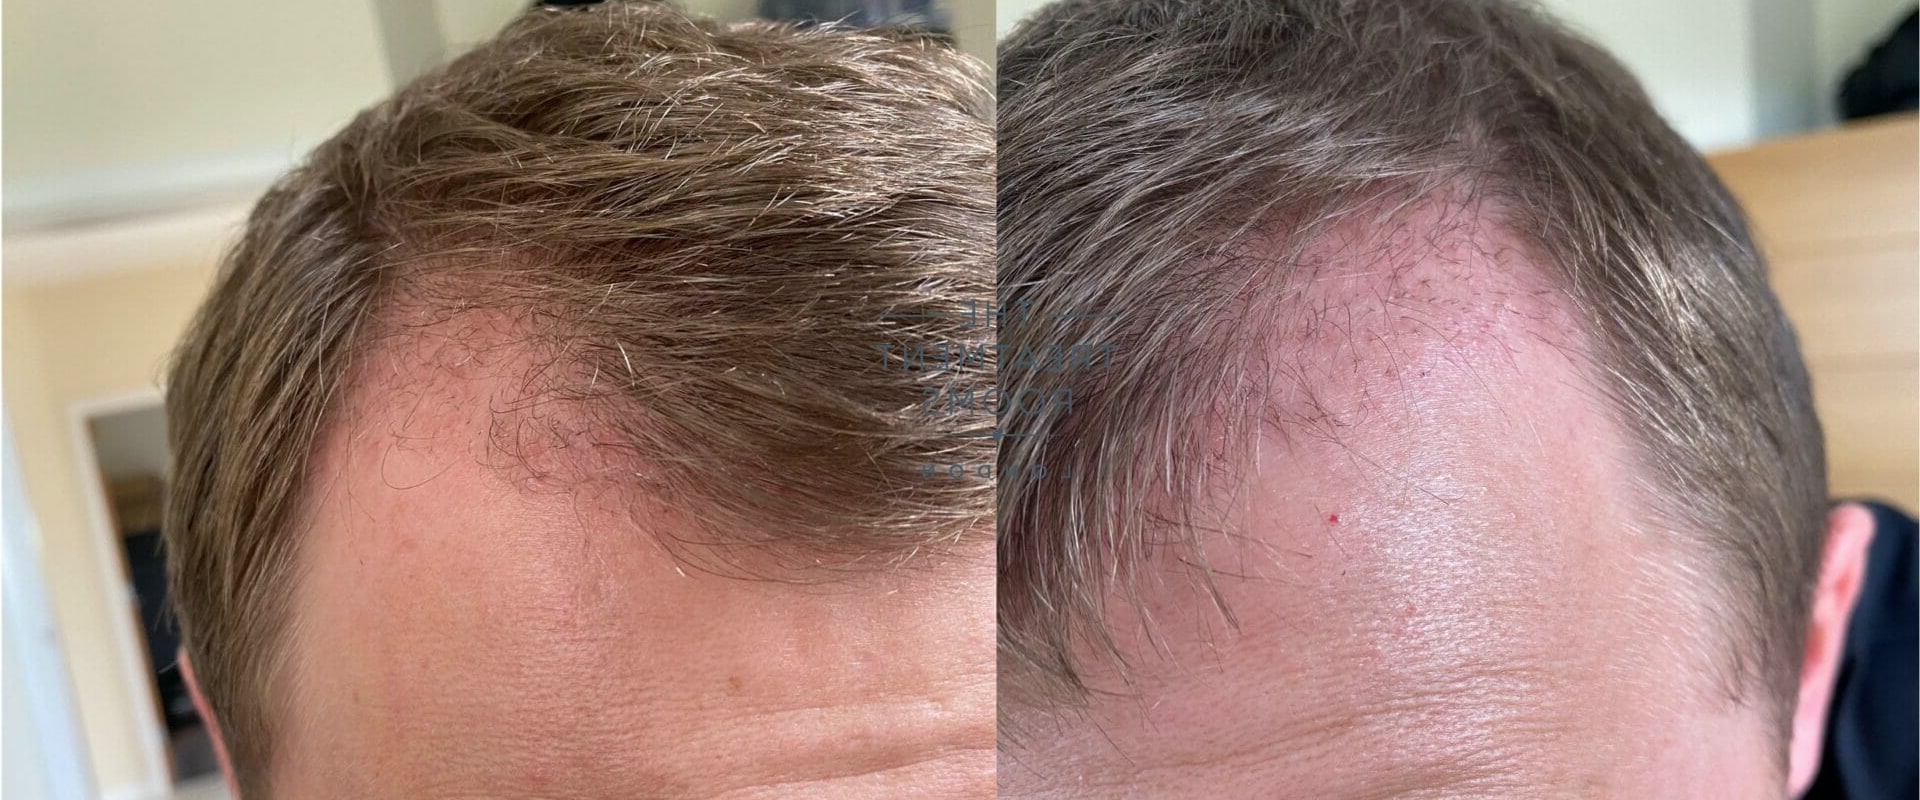 How Long Does a Hair Transplant Last?